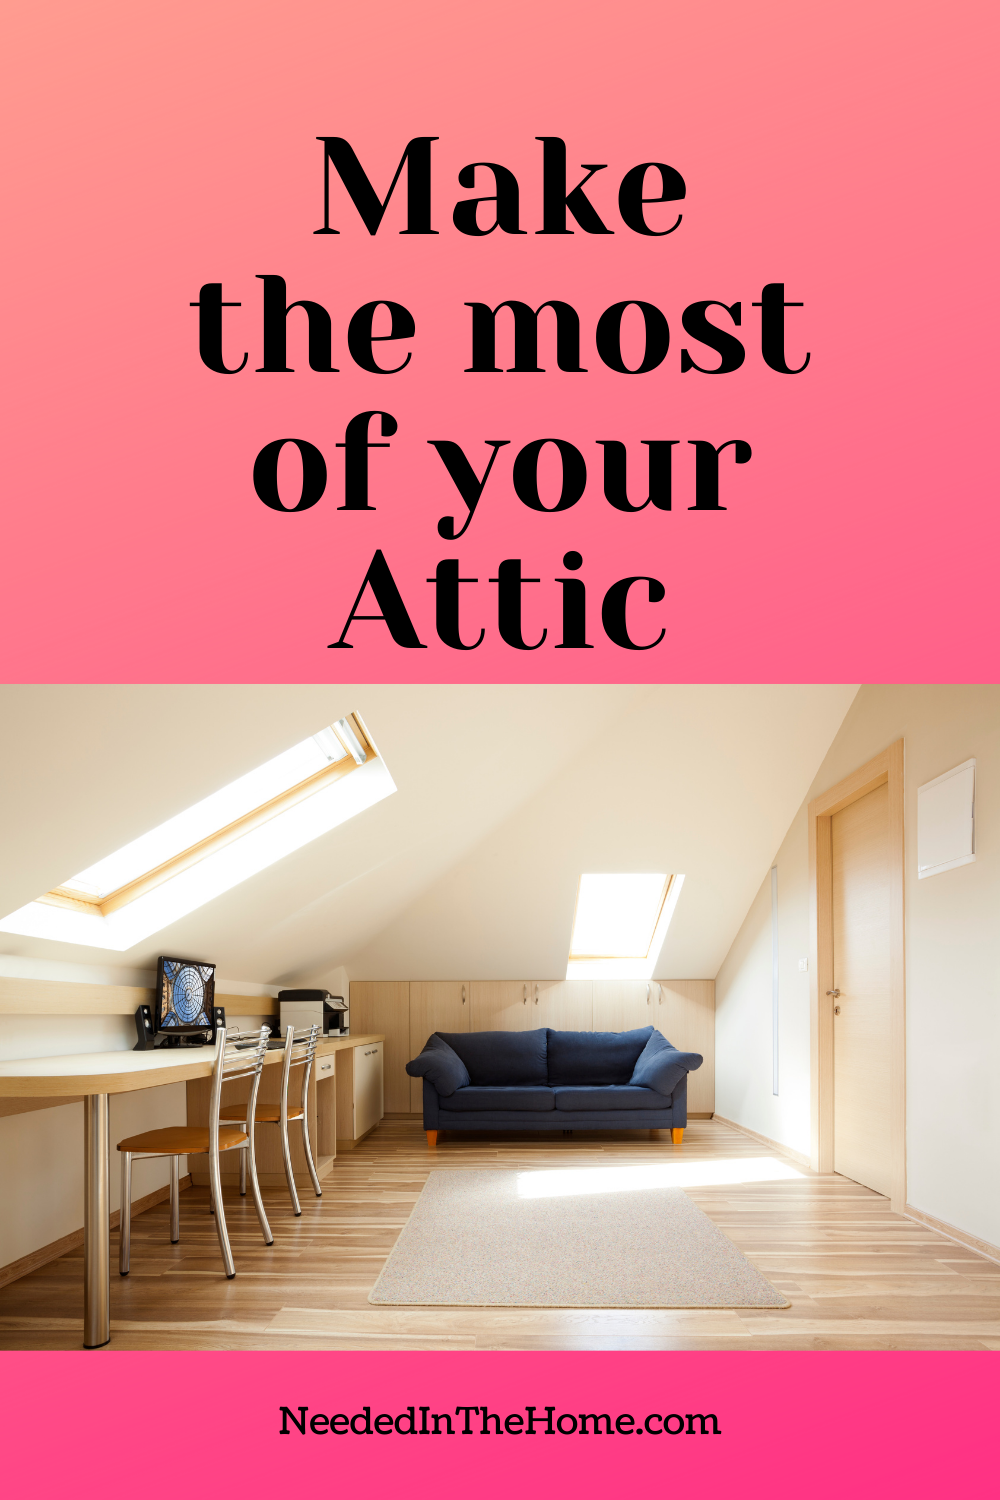 pinterest-pin-description Make The Most Of Your Attic home office family room table laptop couch neededinthehome